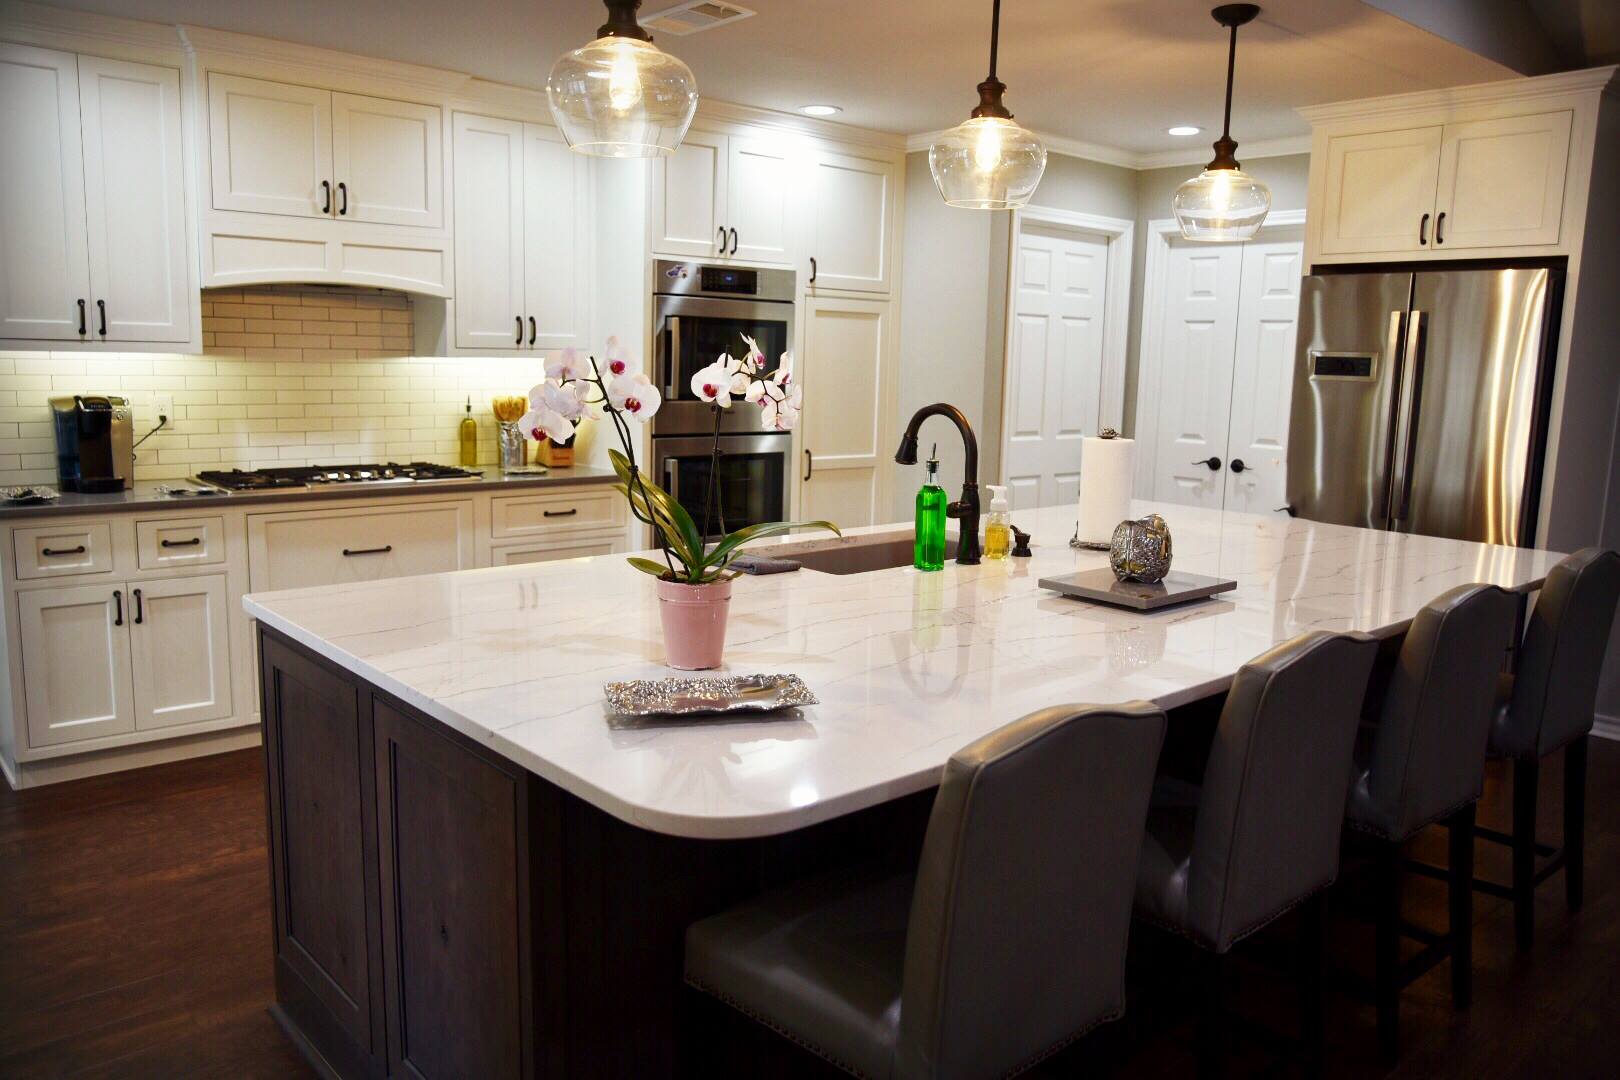   Cambria &nbsp;Countertops, Shiloh Cabinetry,&nbsp; Bosch Home &nbsp;Appliances,  Masonite Doors ,  Karndean Flooring , and  Coronado Stone Products &nbsp;make this local project a real treat for us to showcase. 